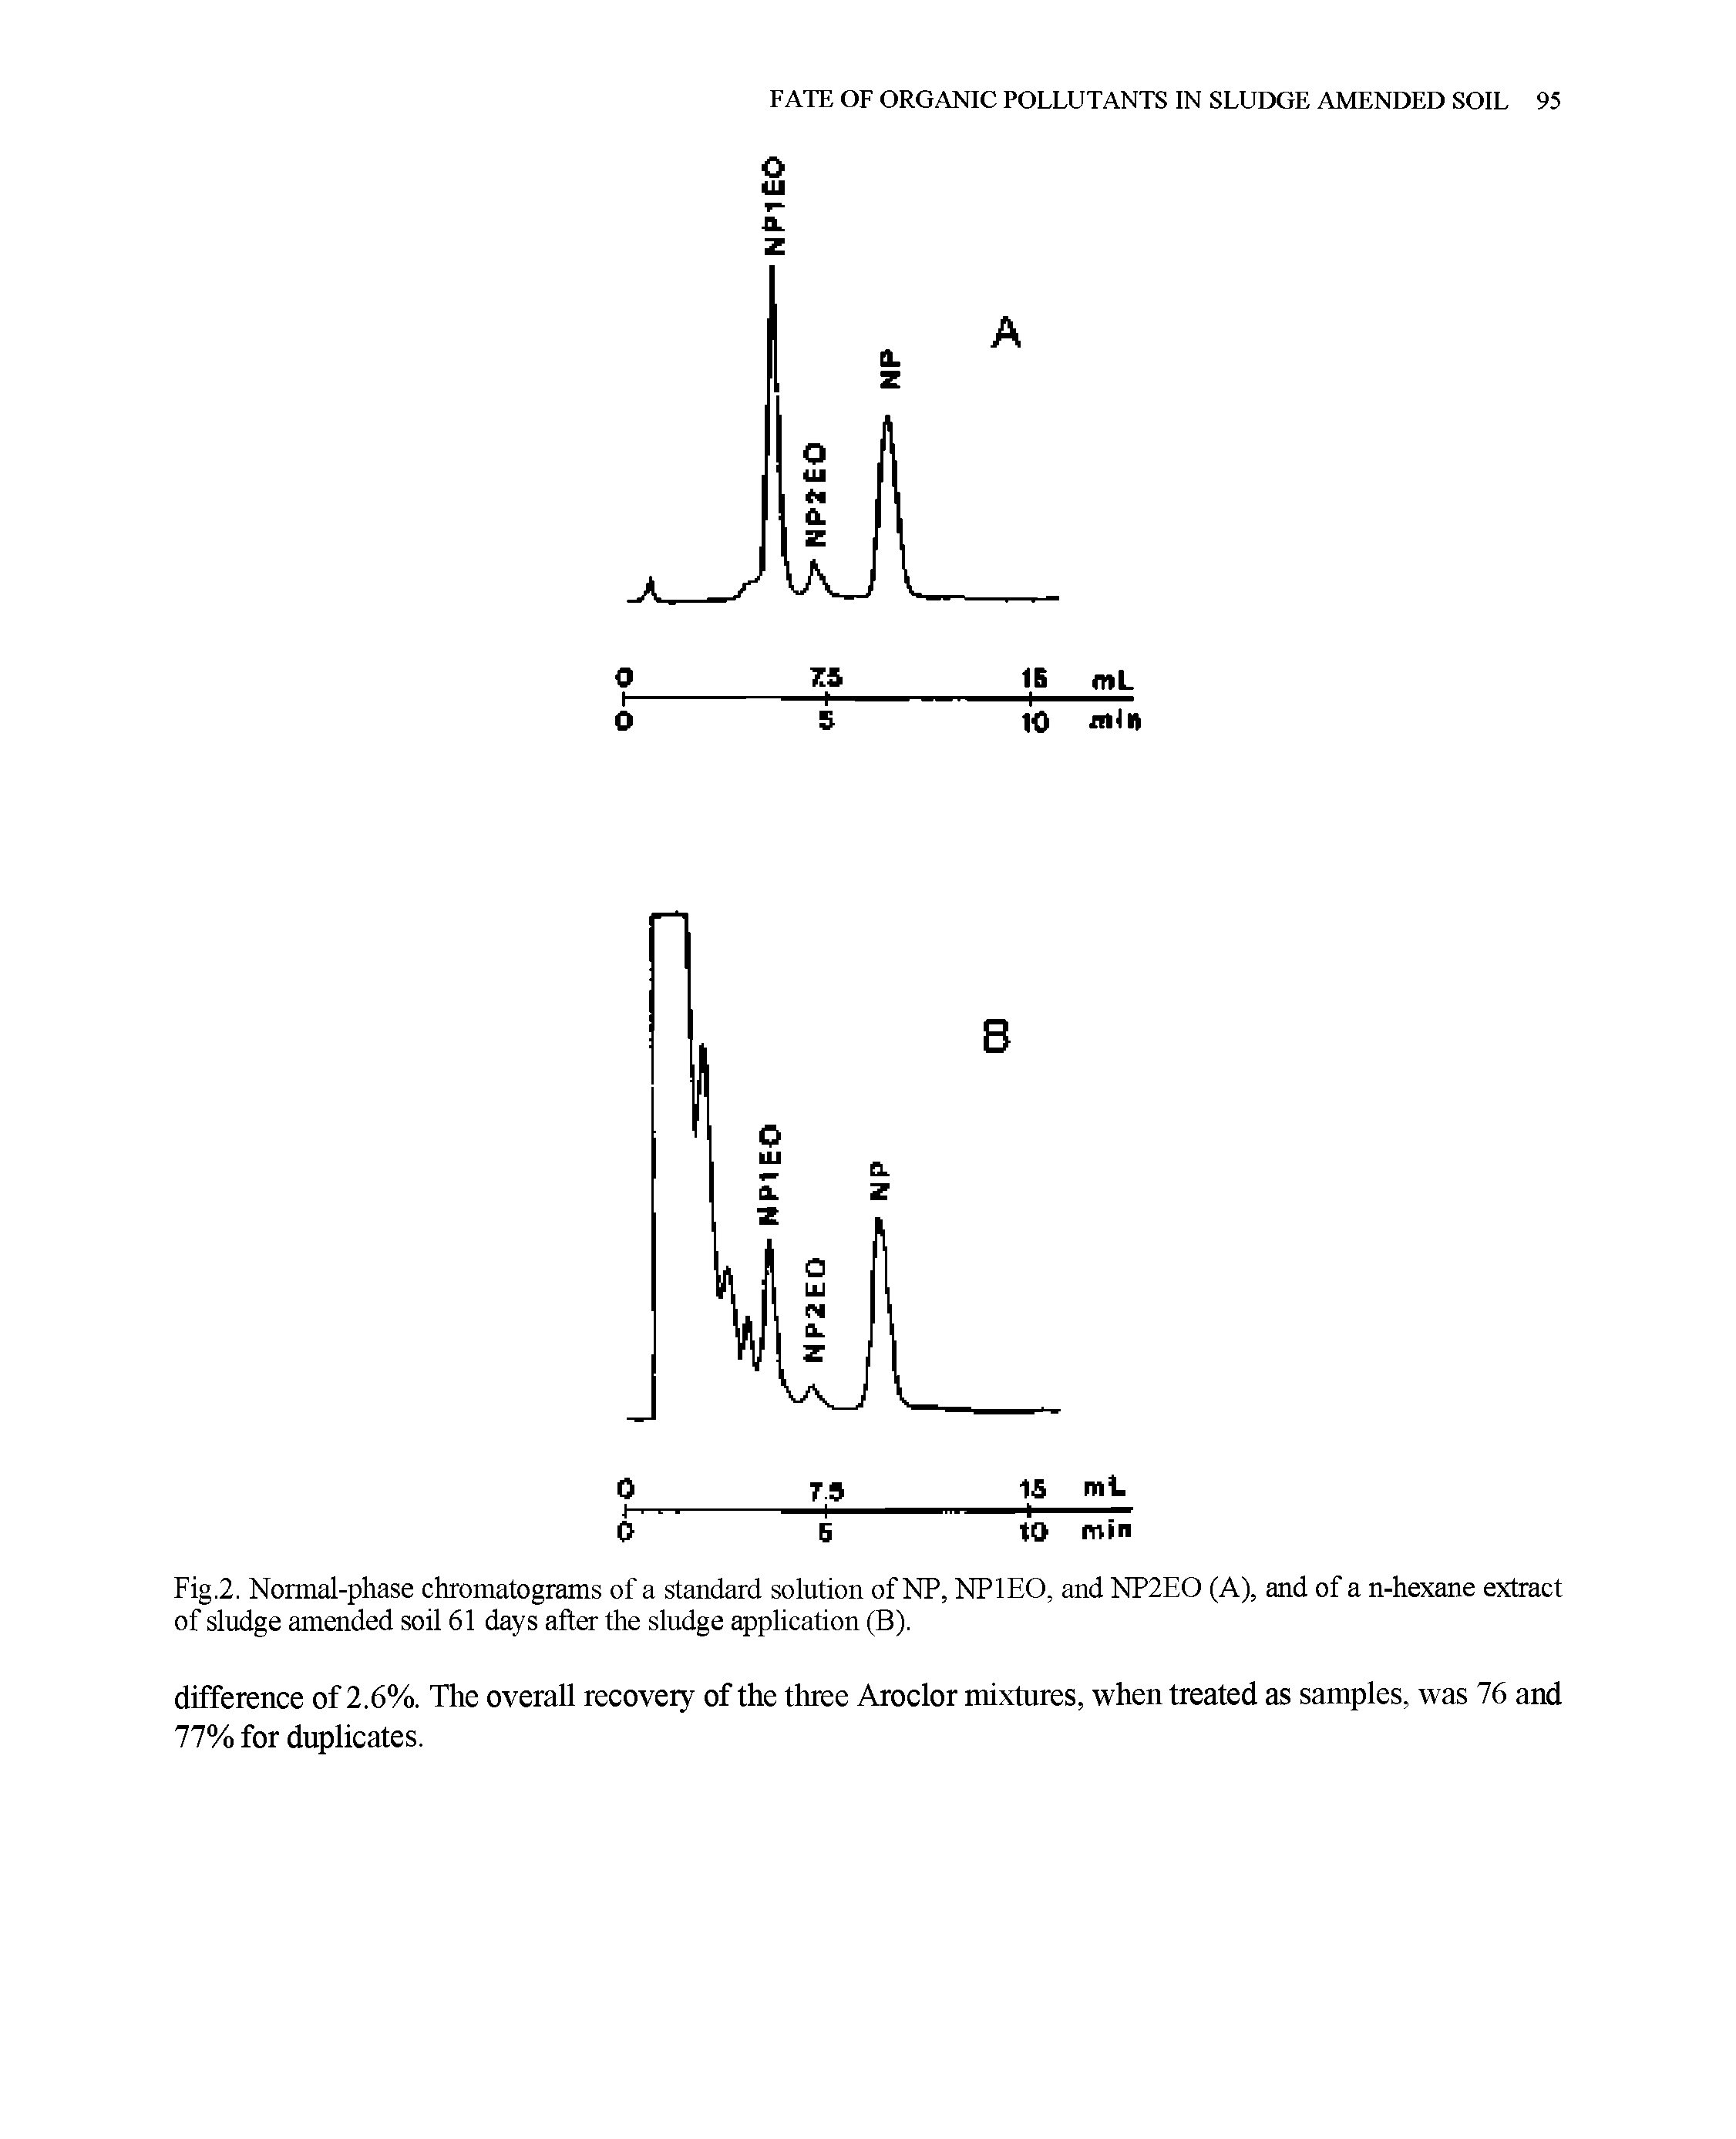 Fig.2. Normal-phase chromatograms of a standard solution of NP, NPIEO, and NP2EO (A), and of a n-hexane extract of sludge amended soil 61 days after the sludge application (B).